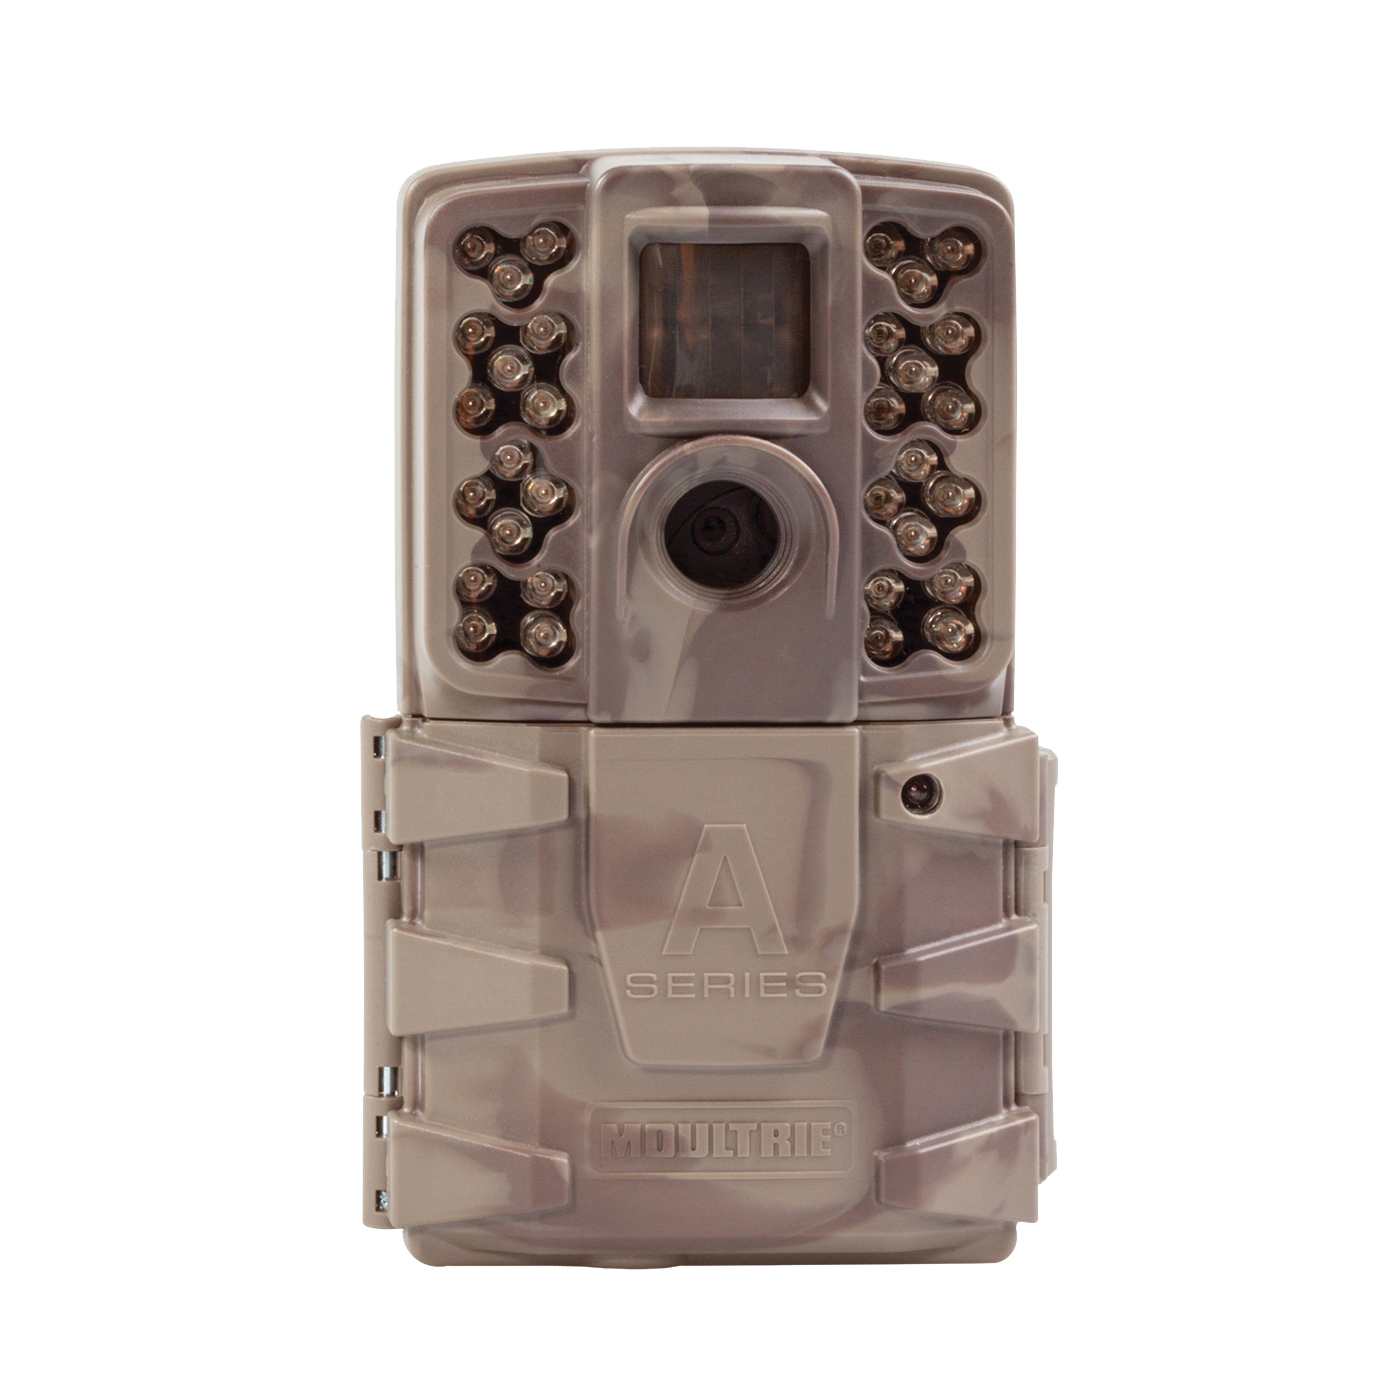 MOULTRIE MCG-13202